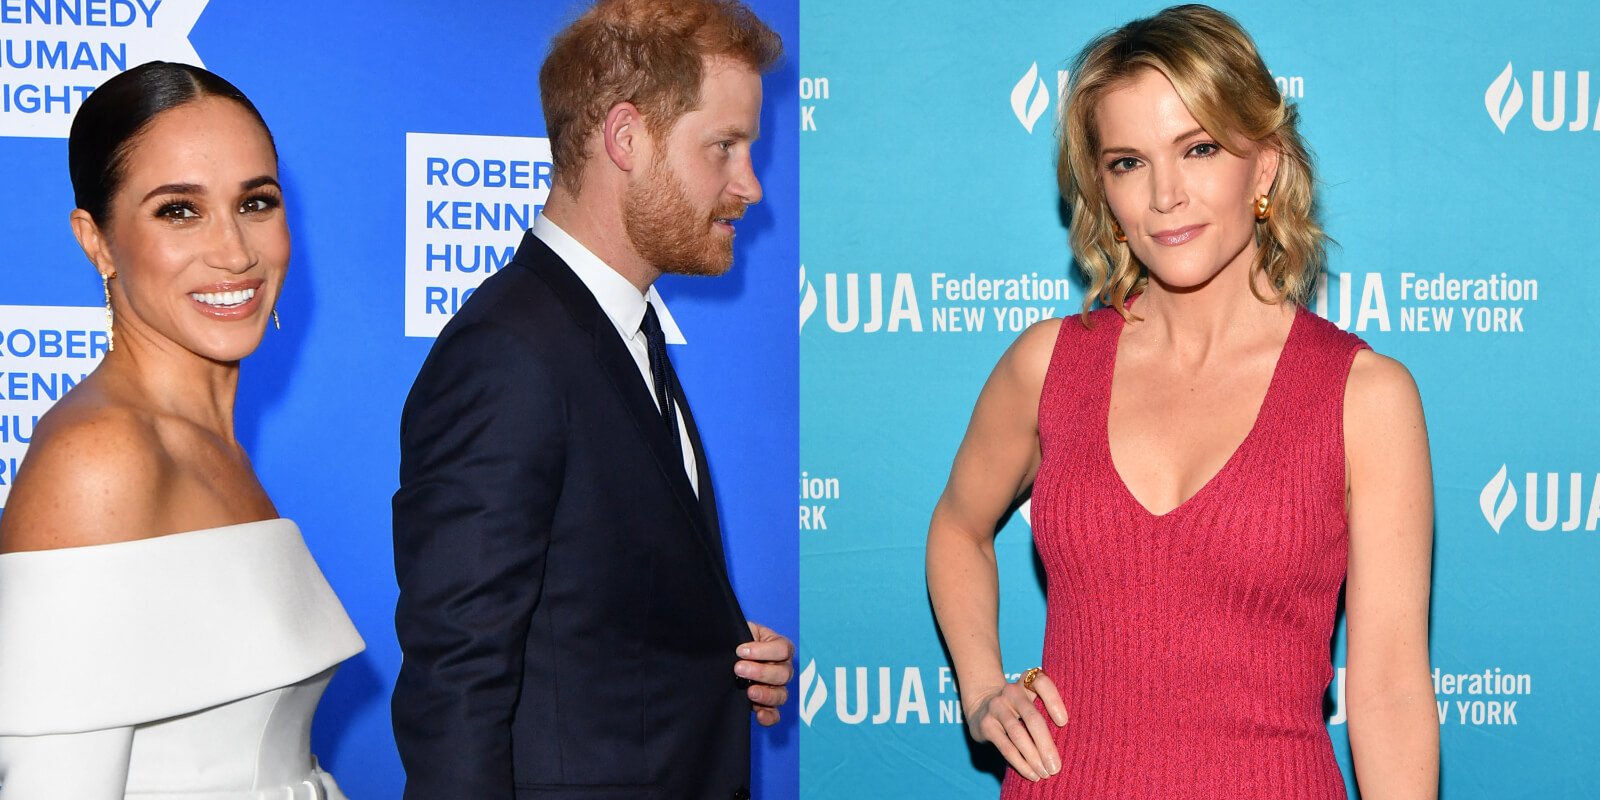 Meghan Markle, Prince Harry and Megyn Kelly in side by side photographs.